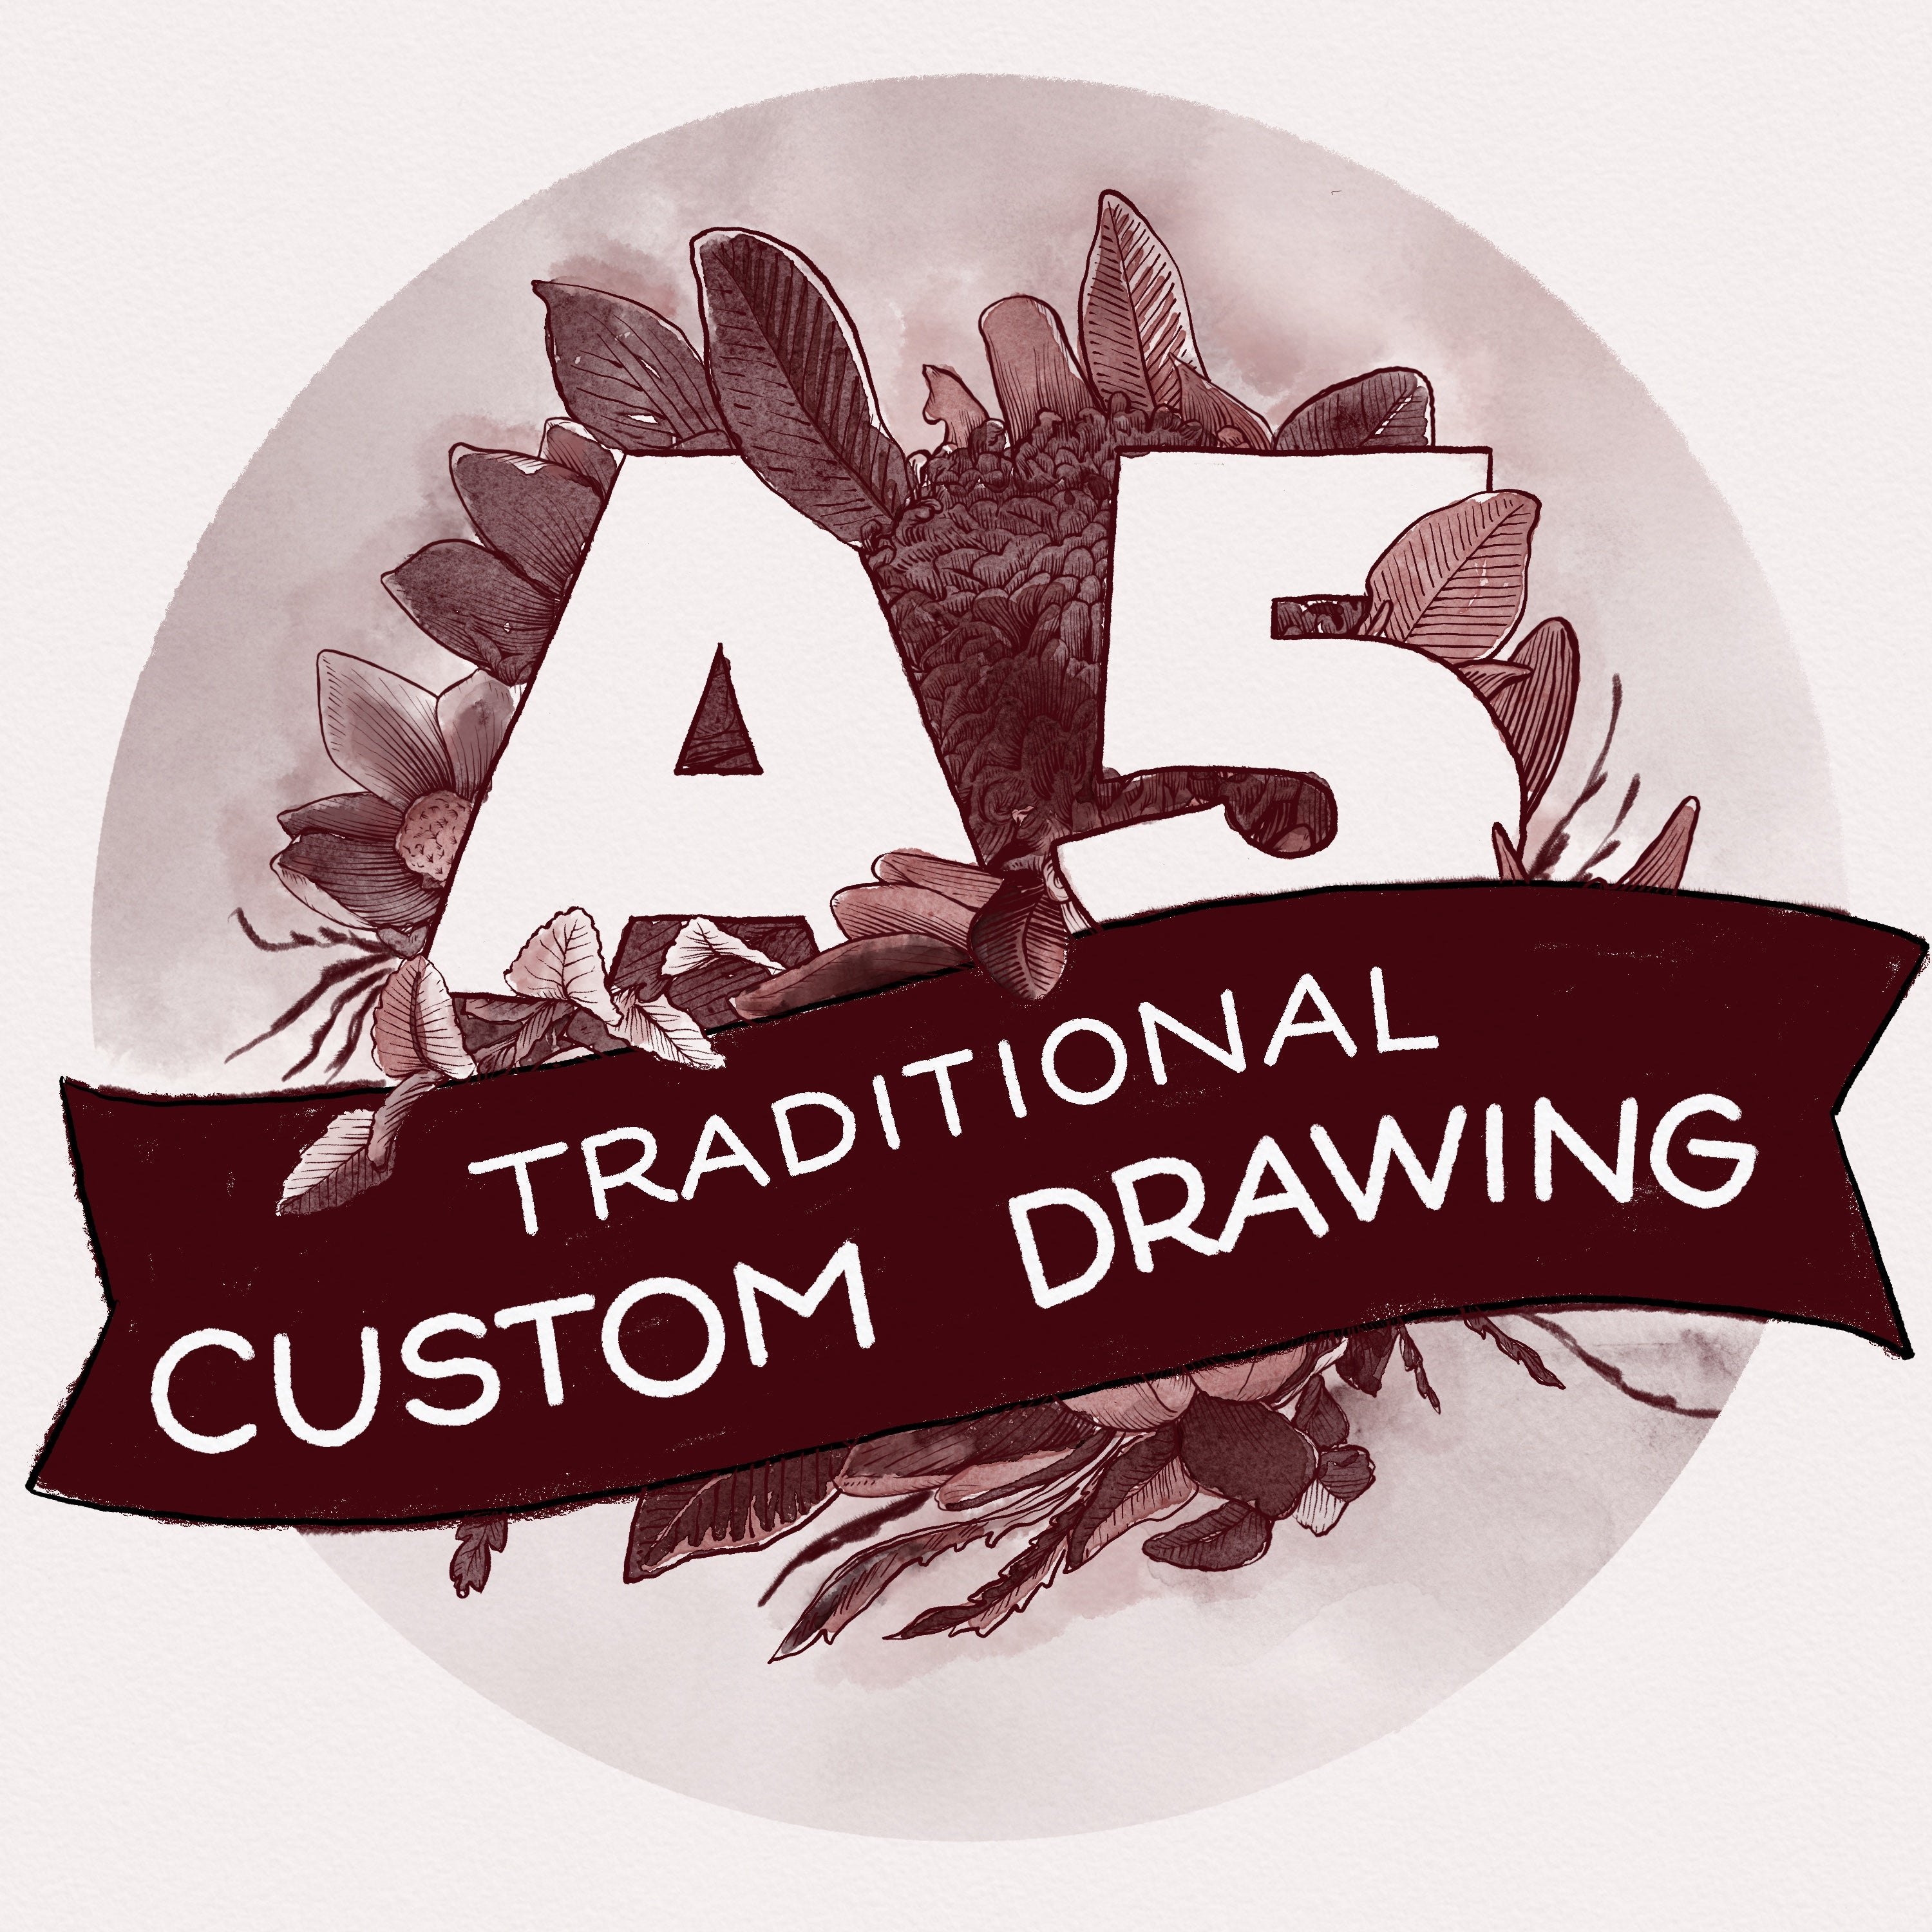 A5 custom traditional drawing - commission a drawing